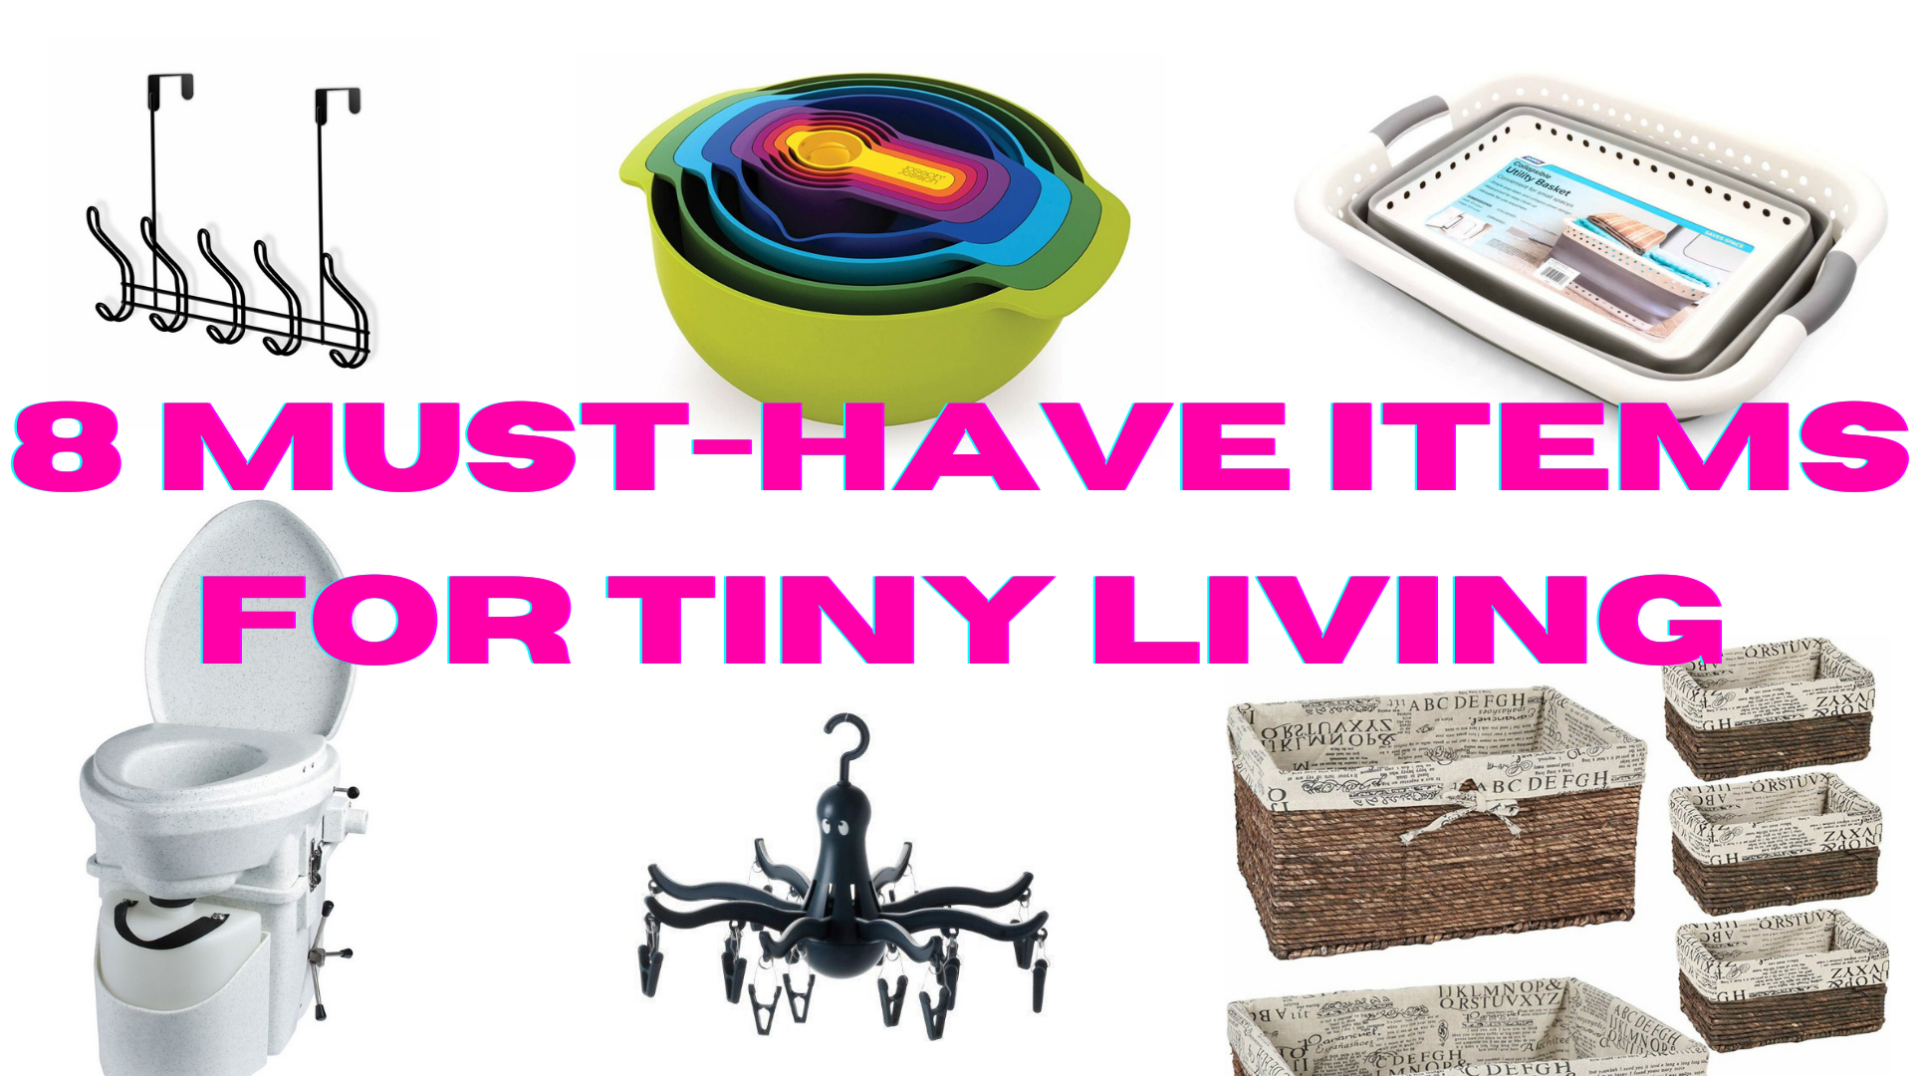 8 Must-Have Items for Living Tiny